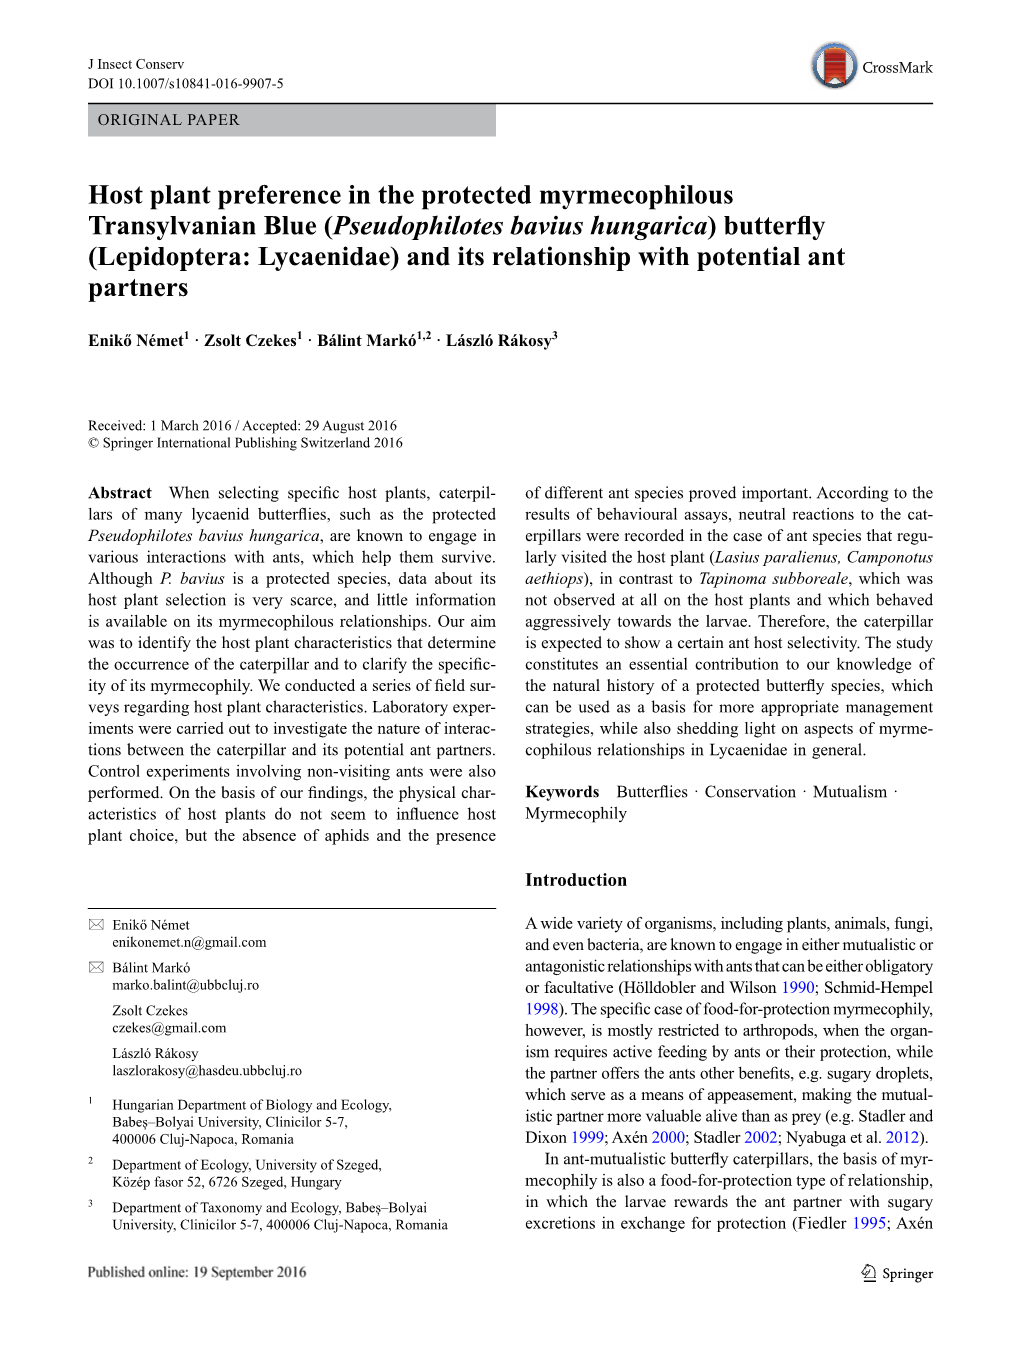 ﻿Host Plant Preference in the Protected Myrmecophilous Transylvanian Blue (﻿Pseudophilotes Bavius Hungarica﻿) Butterfly (L